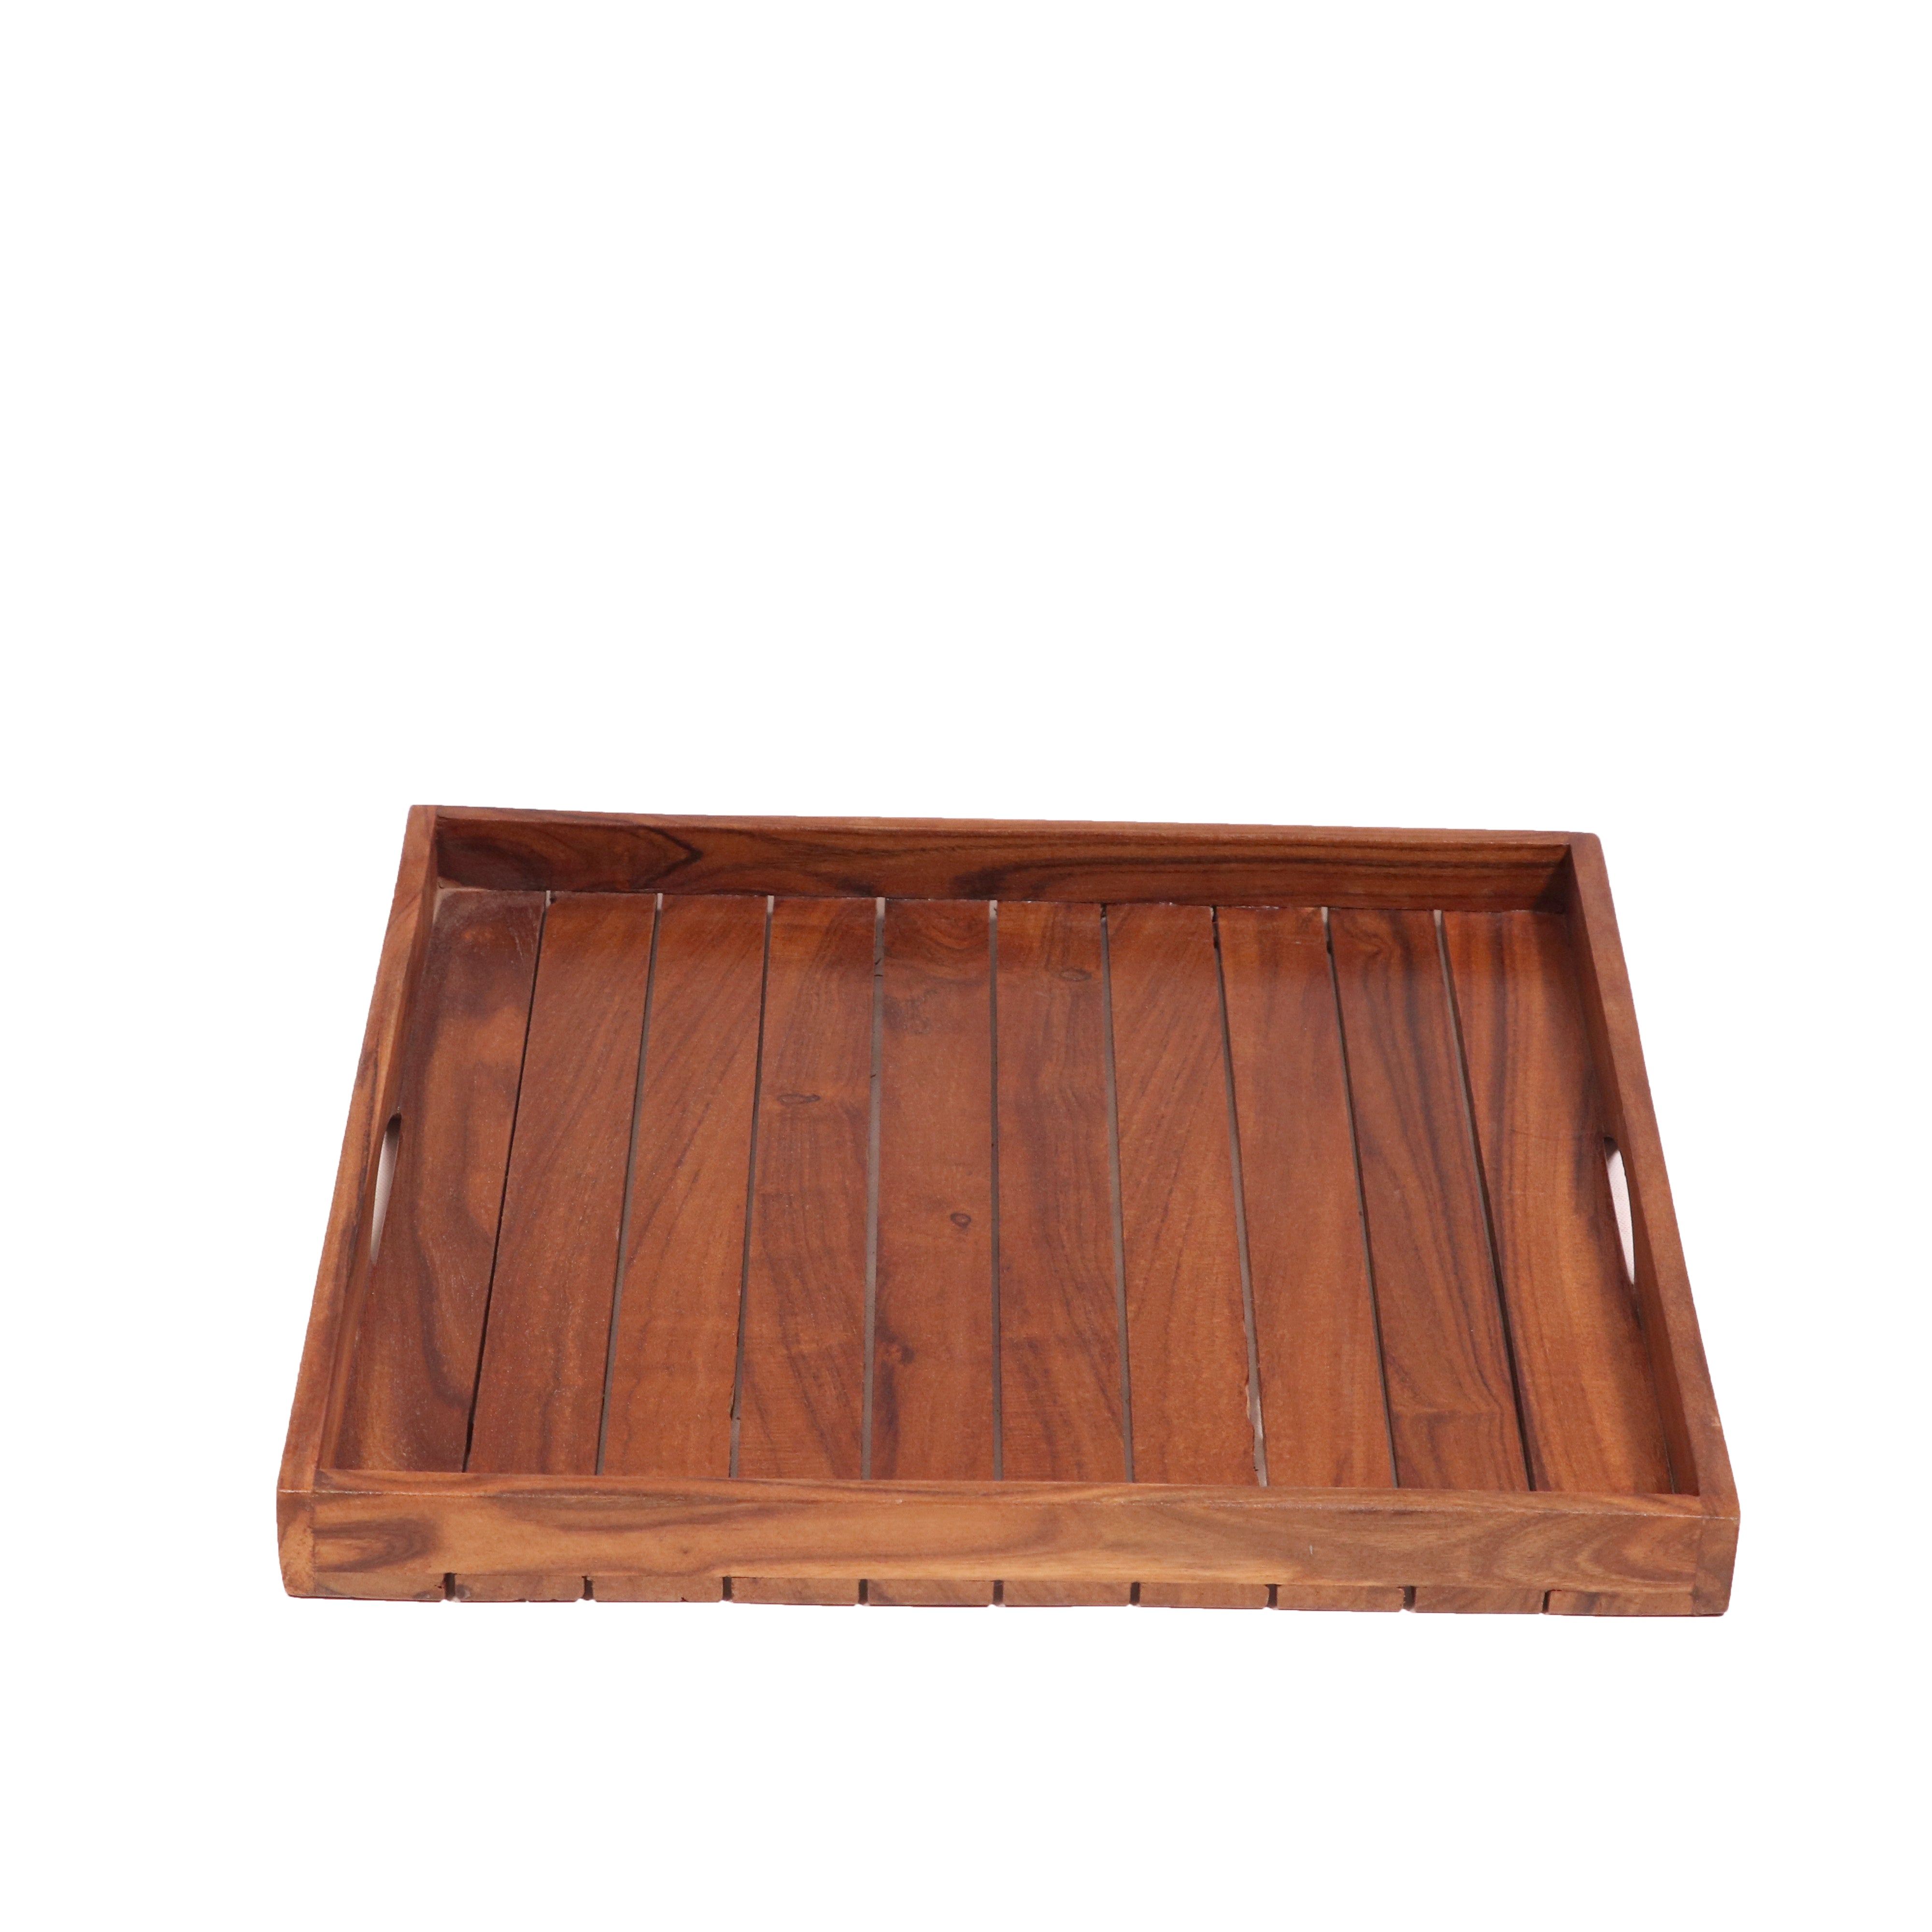 Classic Simple Strip Designed Handmade Wooden Tray - Set of 3 Tray